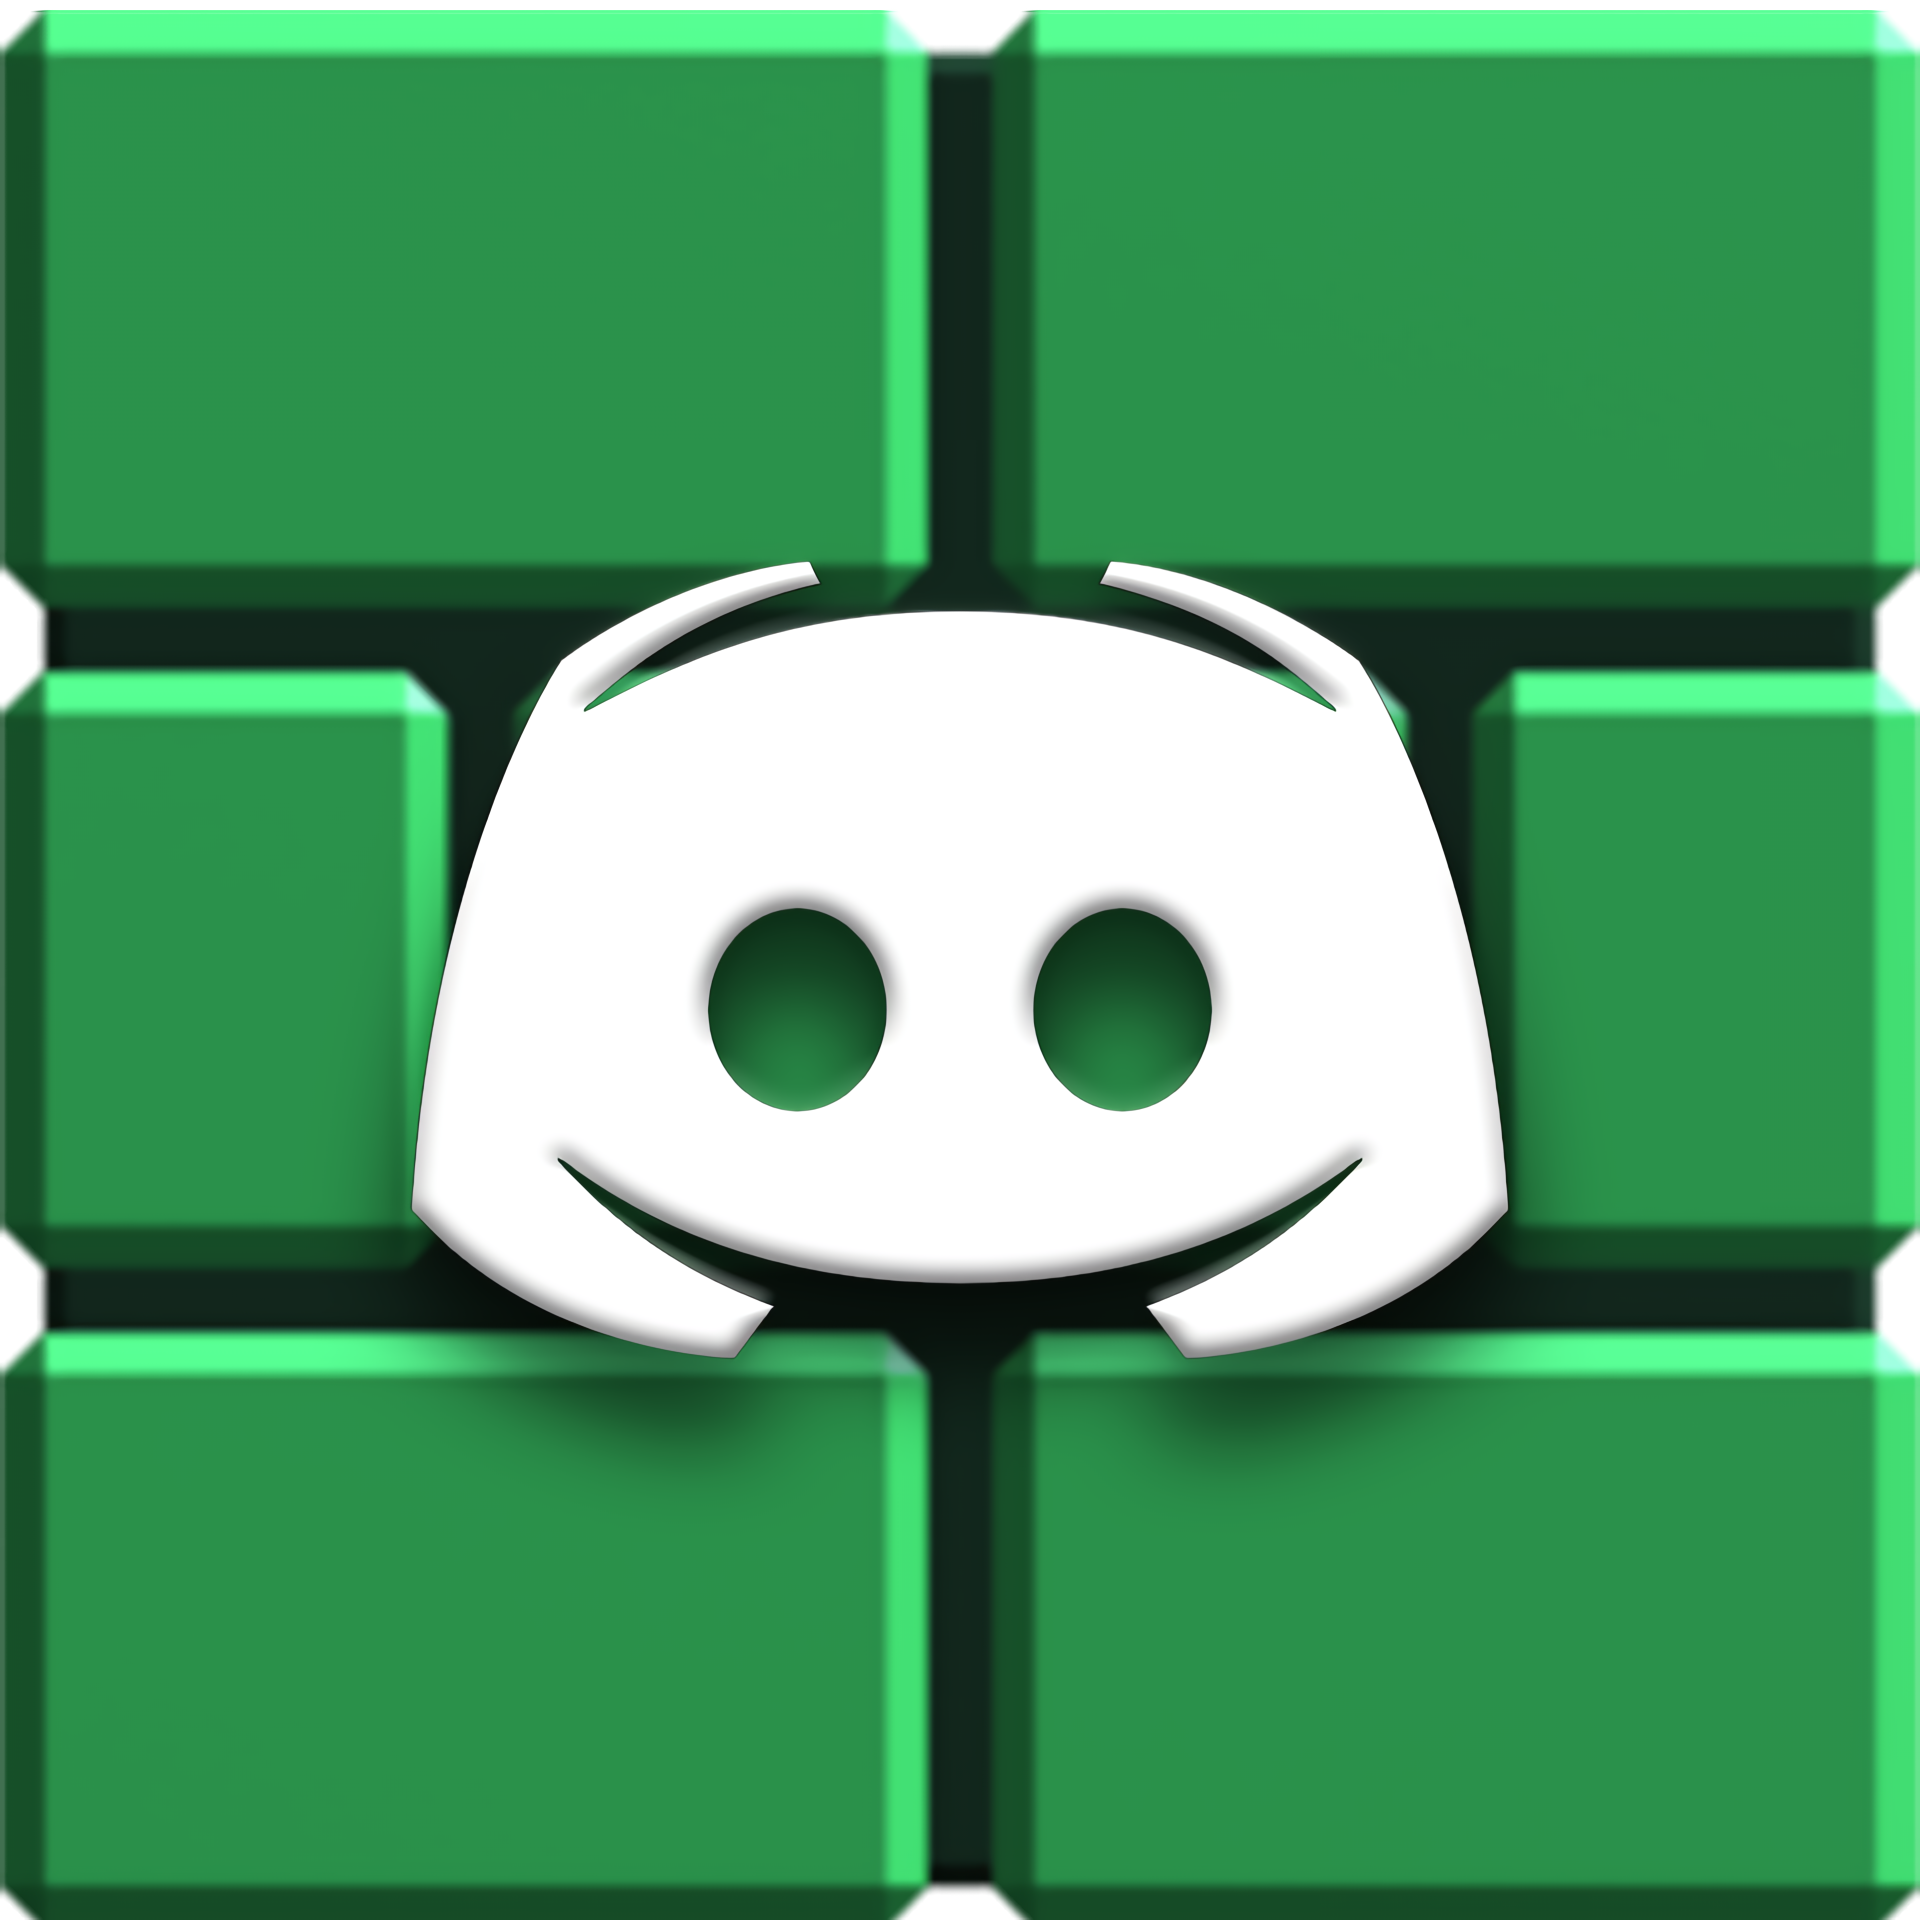 Profile picture for Brickblock. It shows a green Mario-style brick, with the old Discord logo ontop of it.